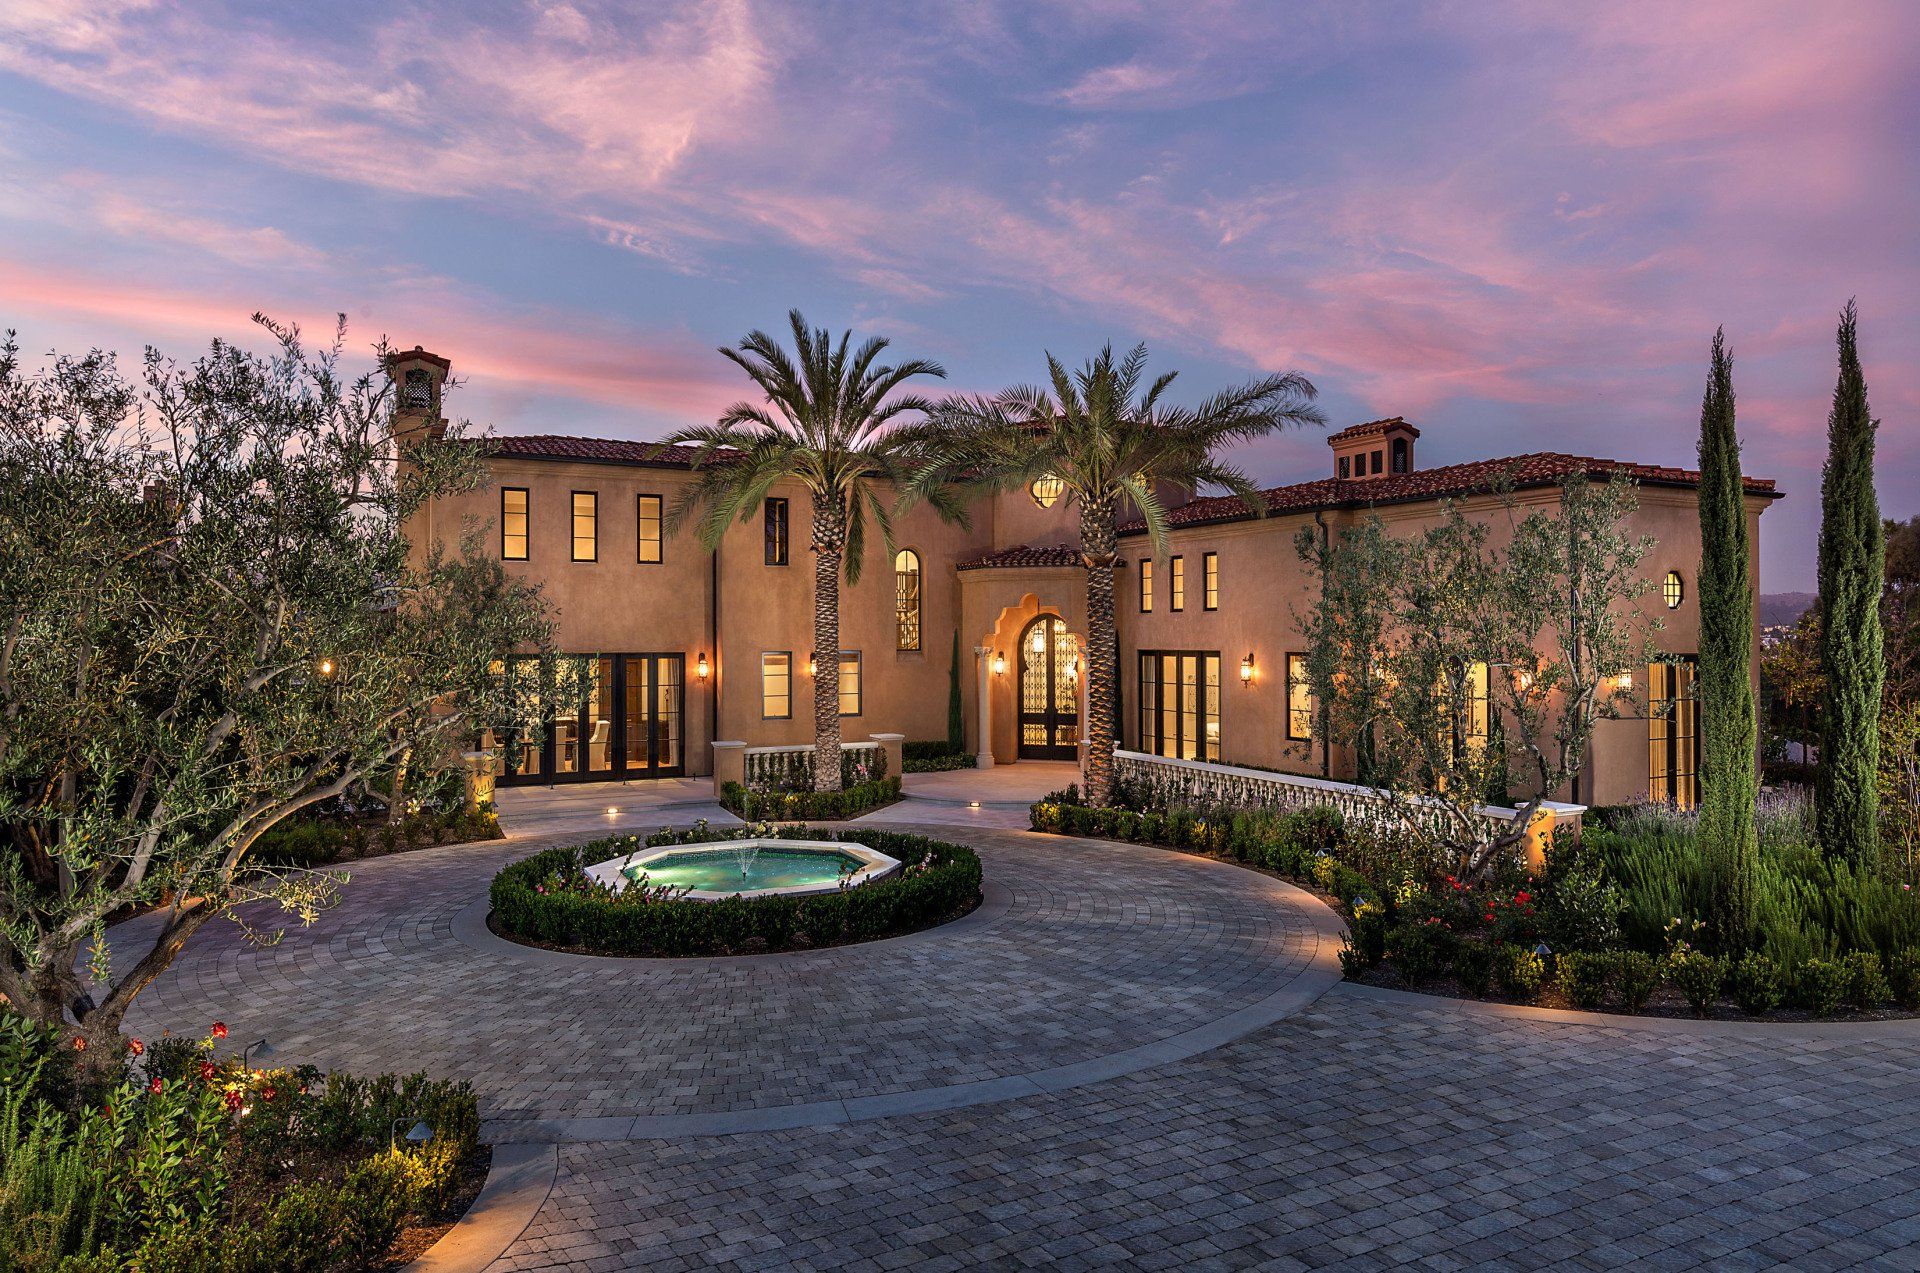 Exterior of a MOROCCAN VILLA located in Orange County designed by Oatman Architects